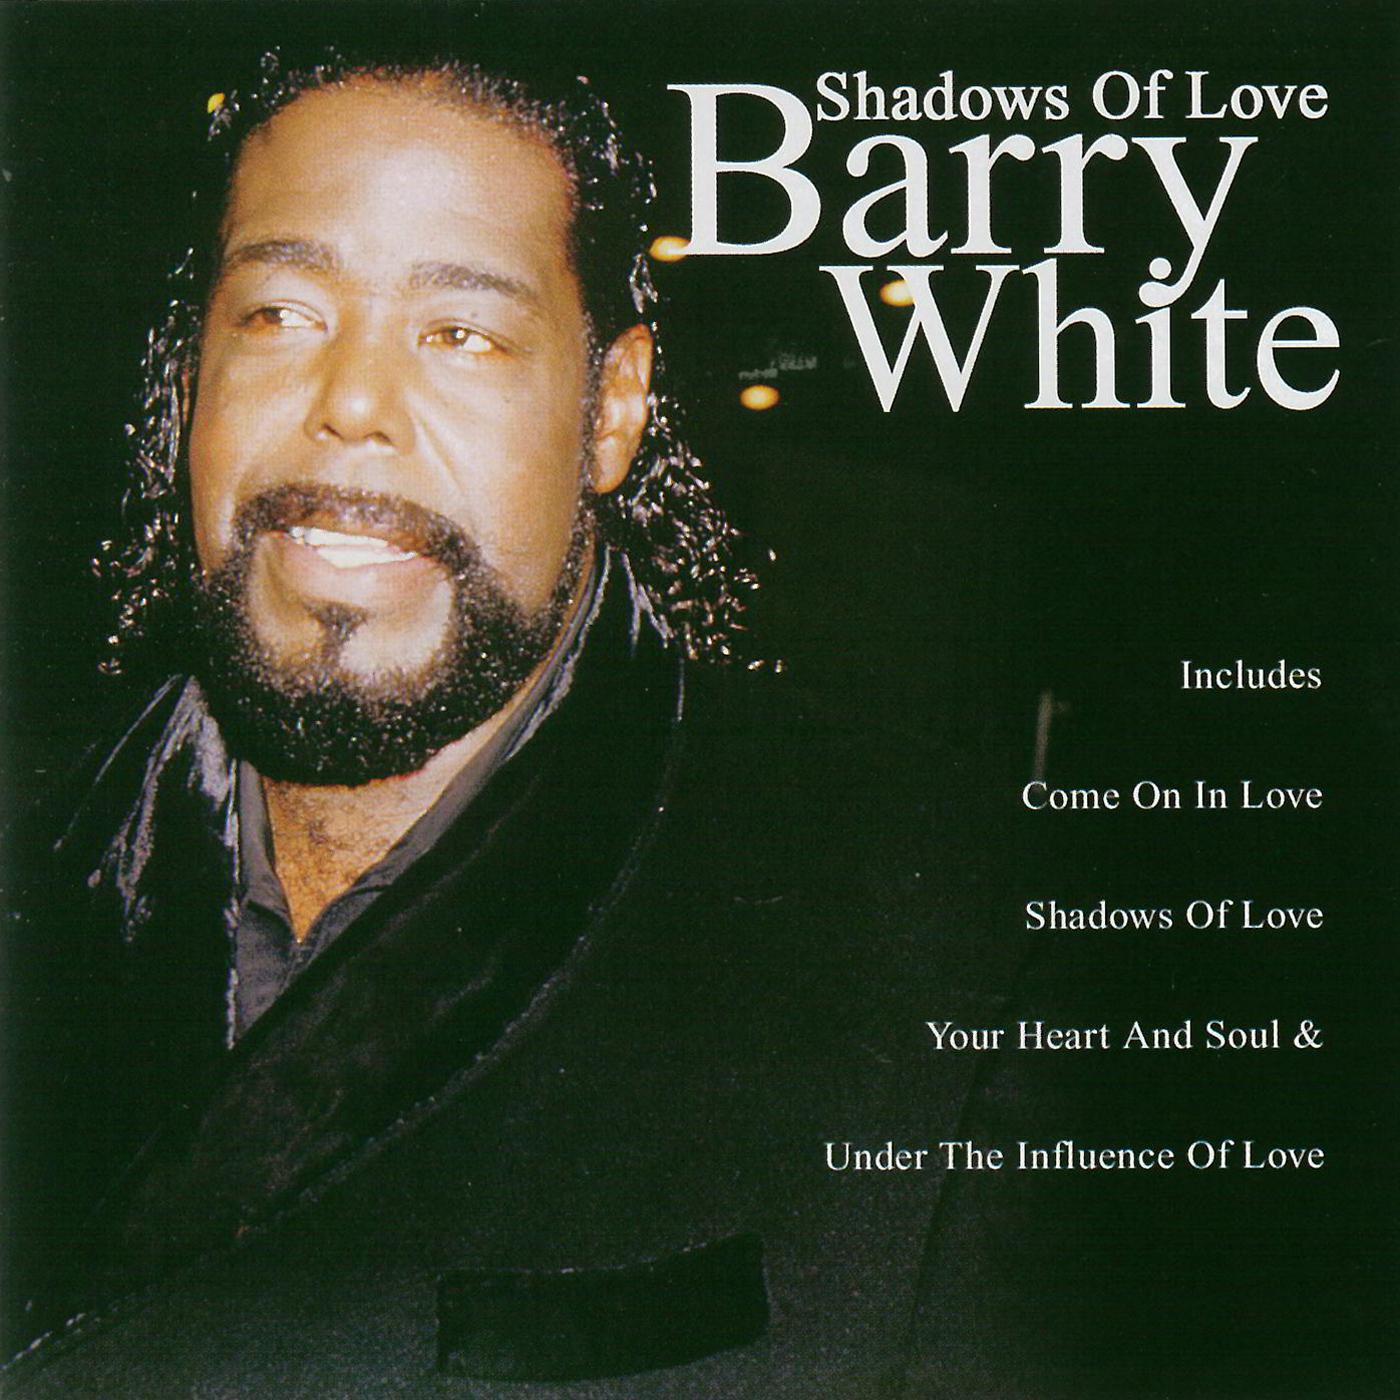 Barry White: Shadows of Love